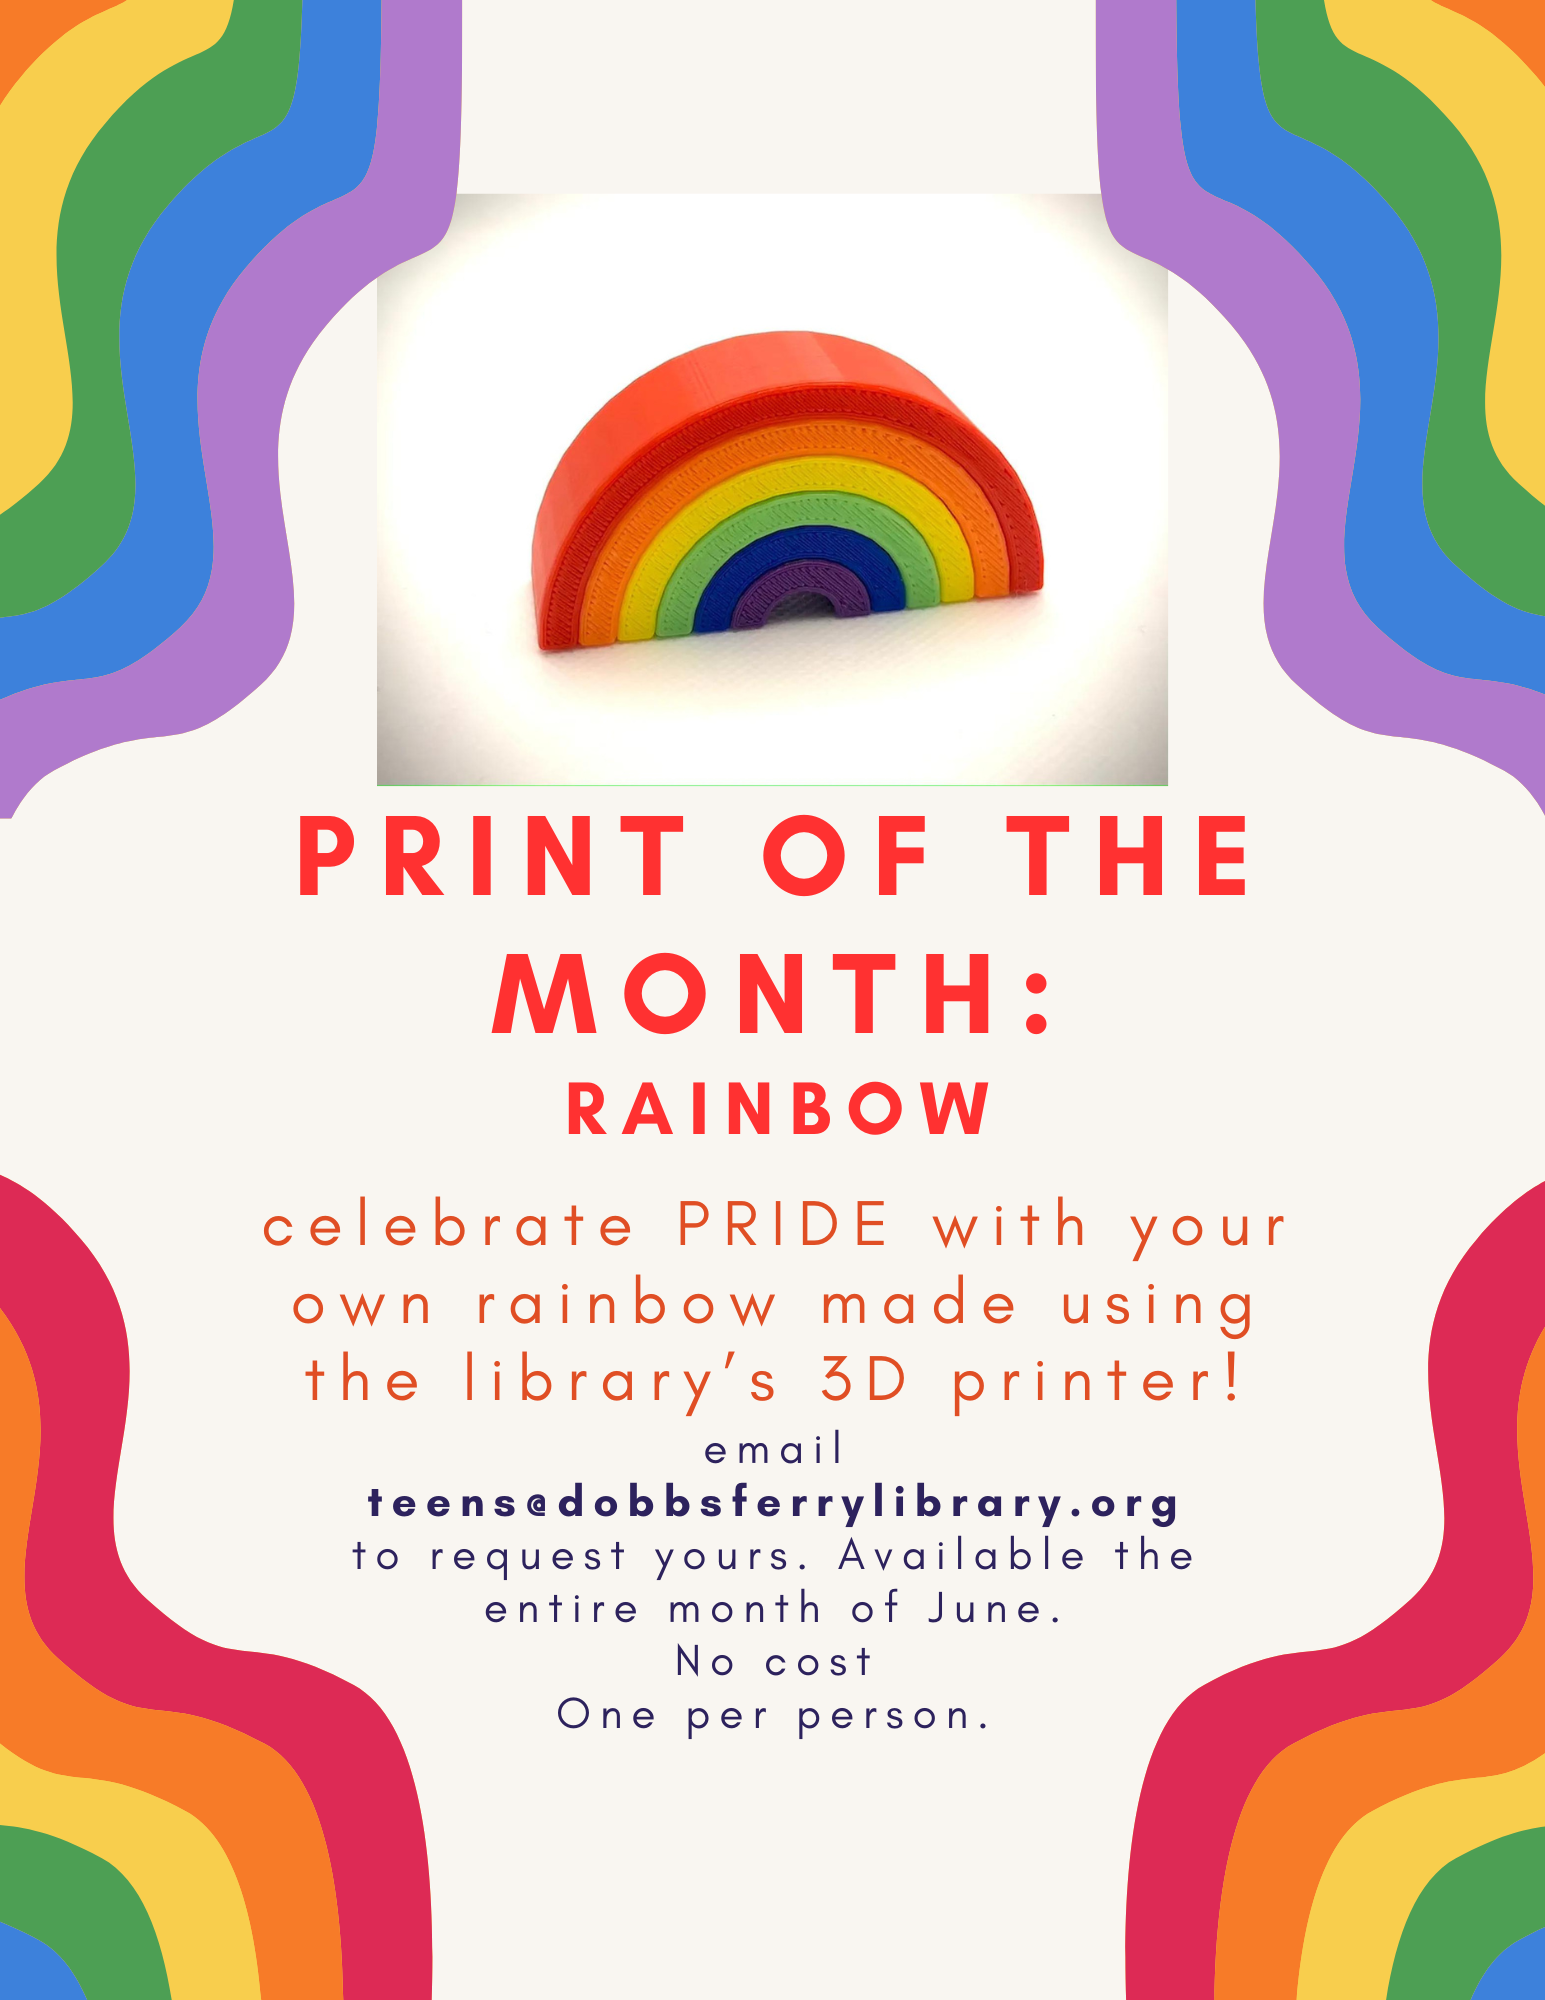 Print of the Month: Rainbow